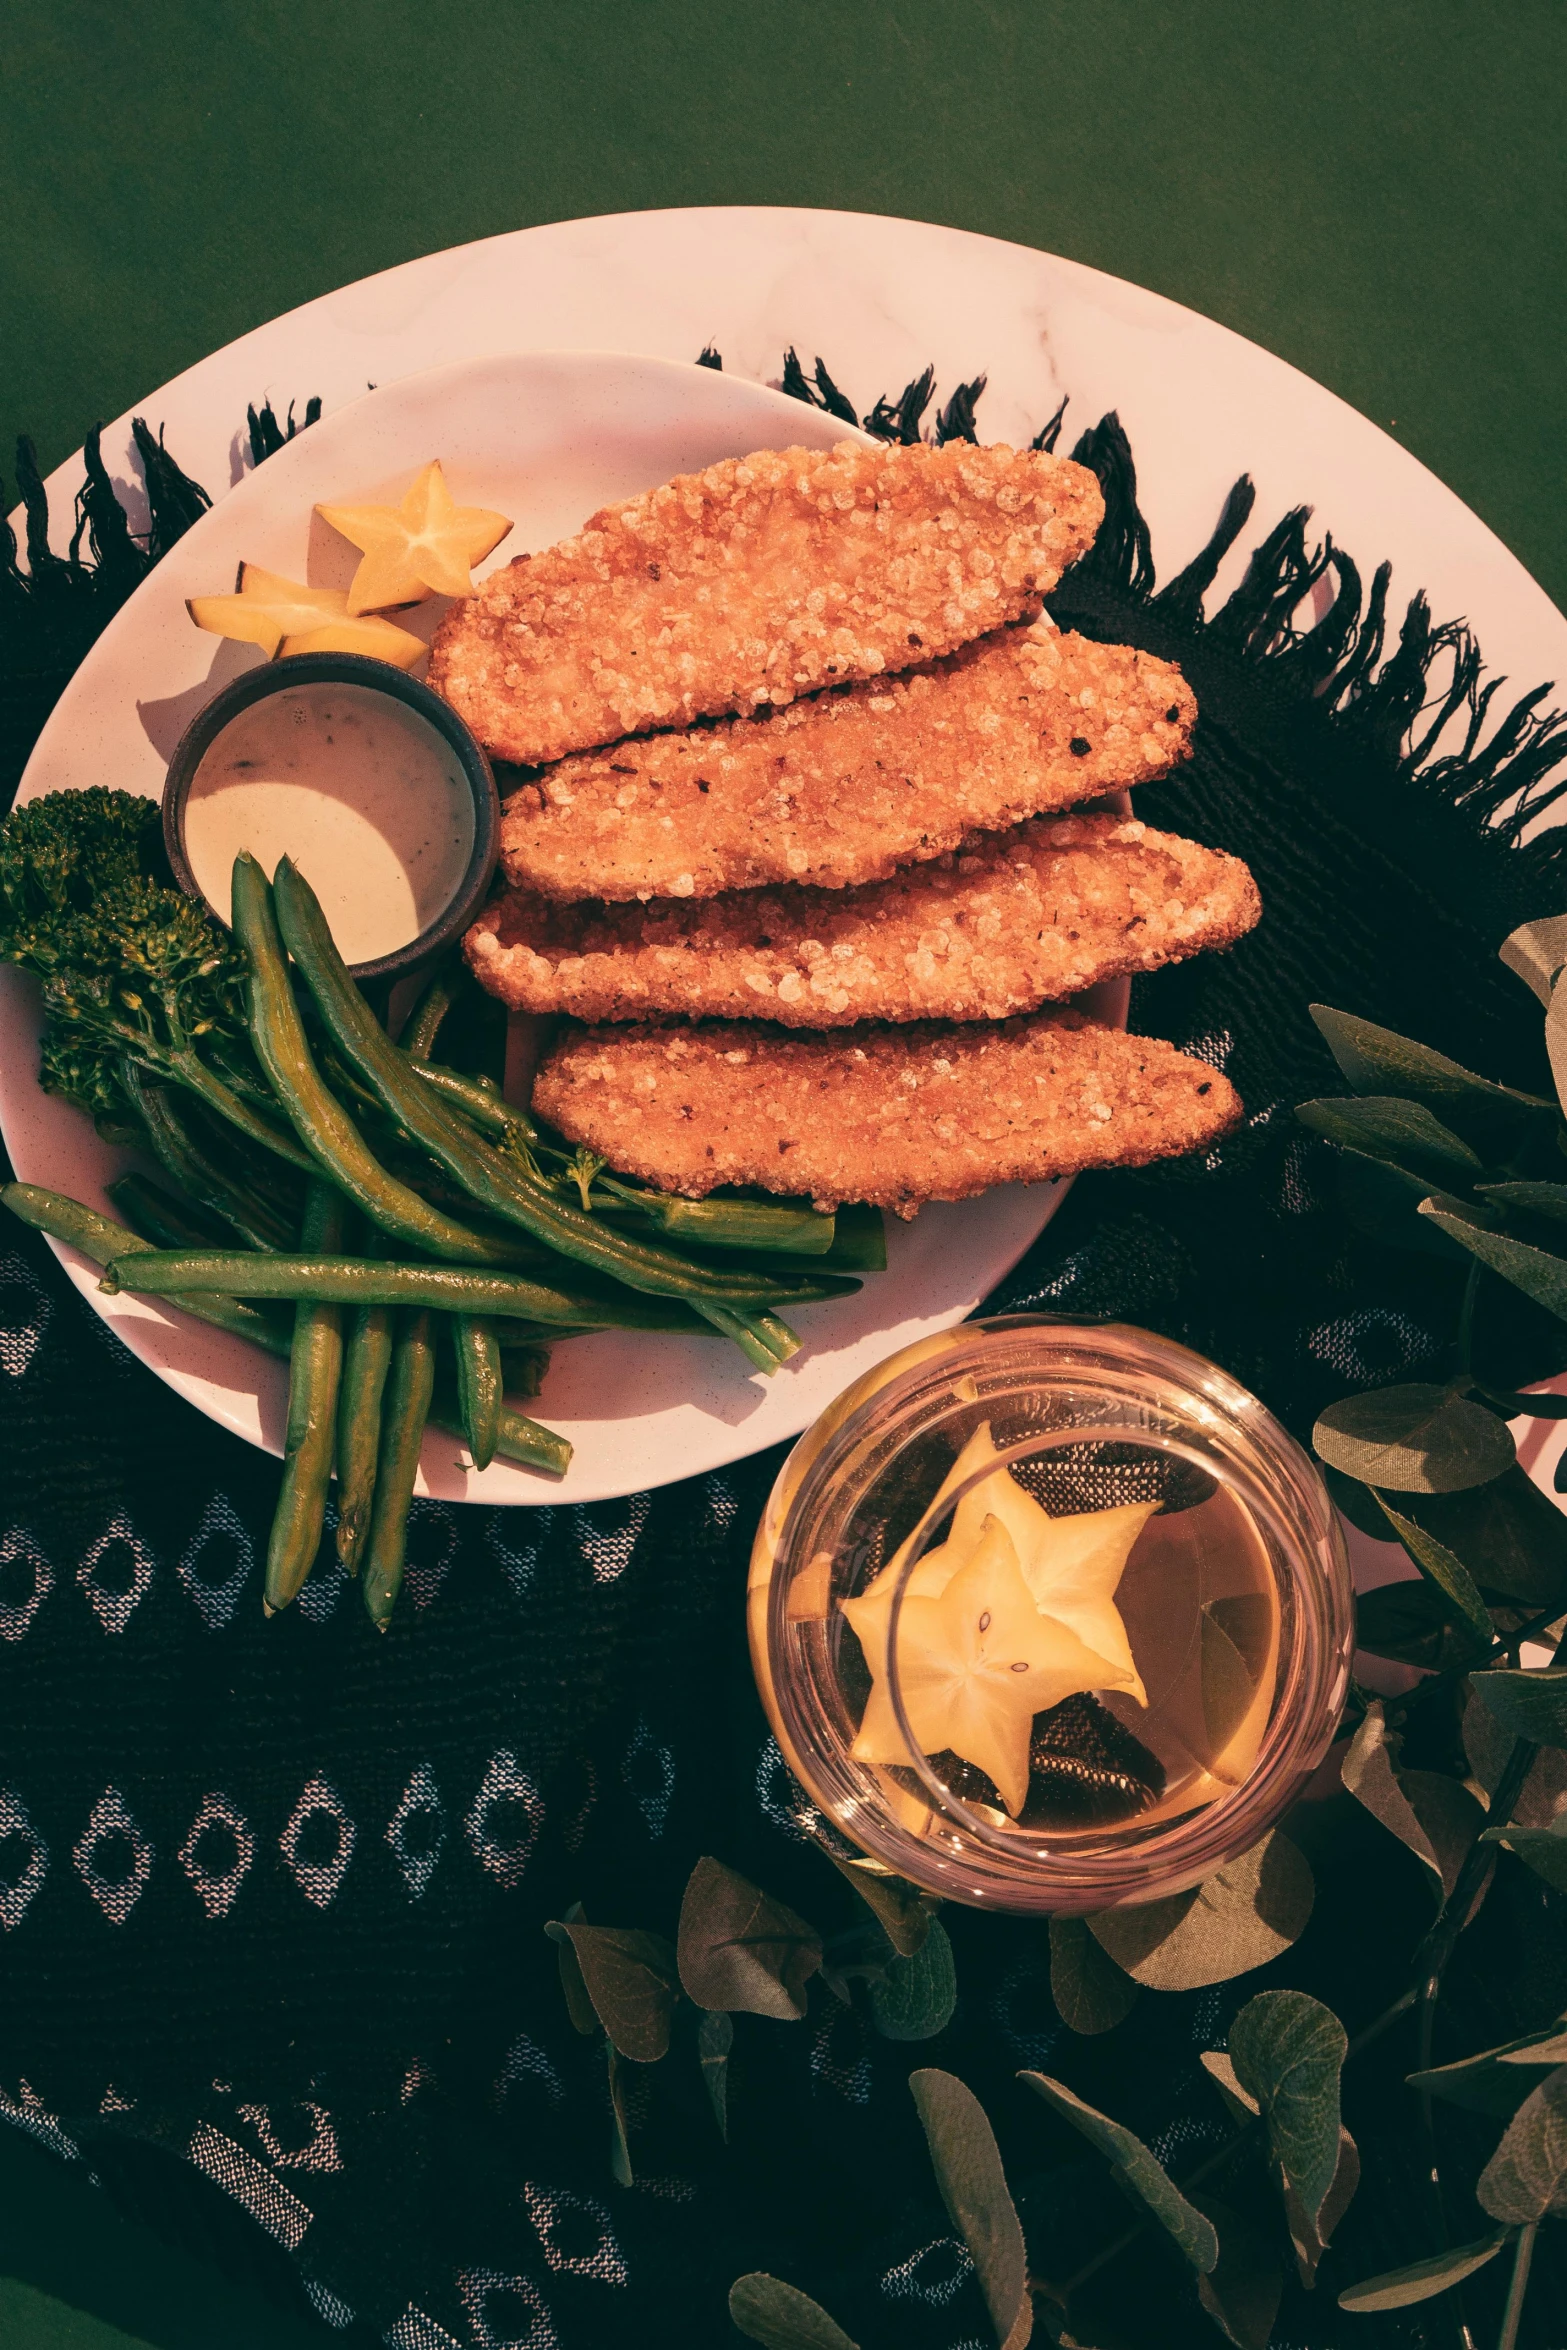 food on a plate, including broccoli, a jar of mustard and a cup with some star cutouts